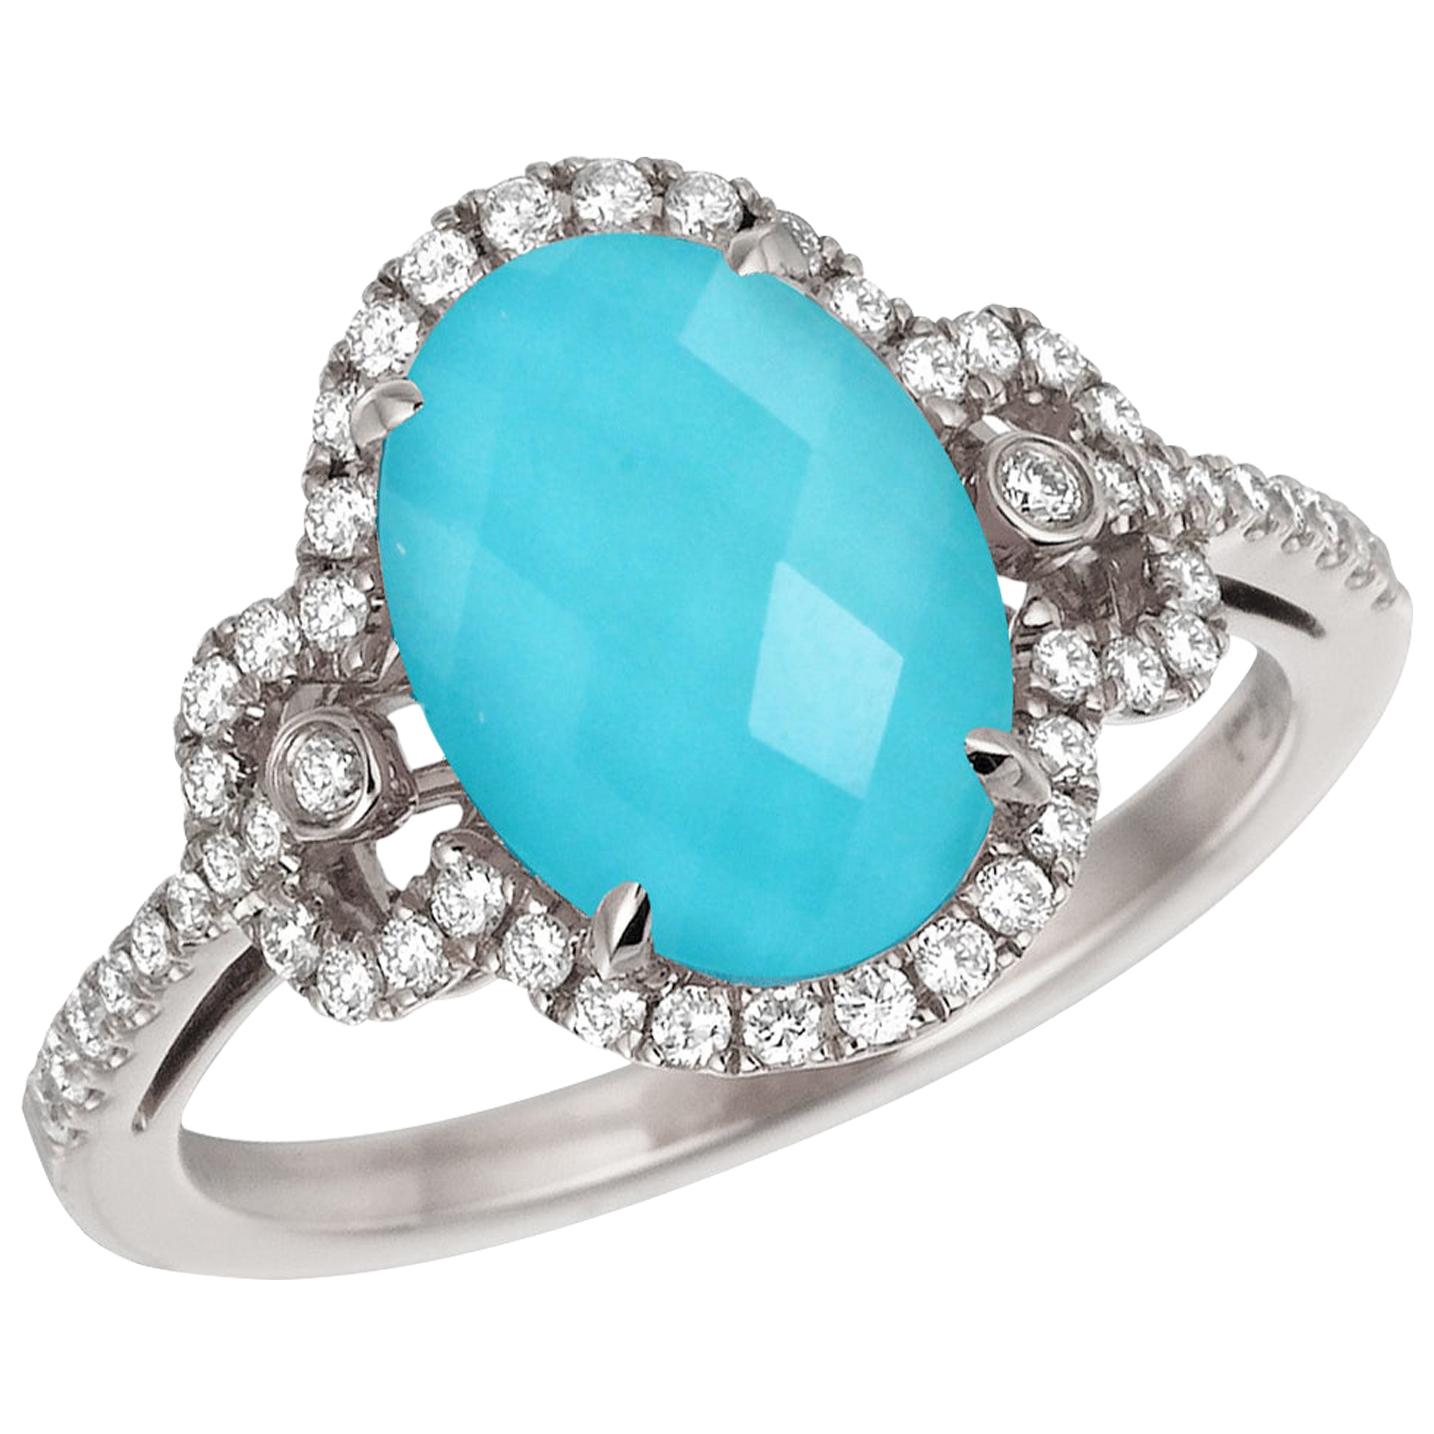 18 Karat Gold Oval Cocktail Doublet Ring with White Topaz, Turquoise & Diamonds